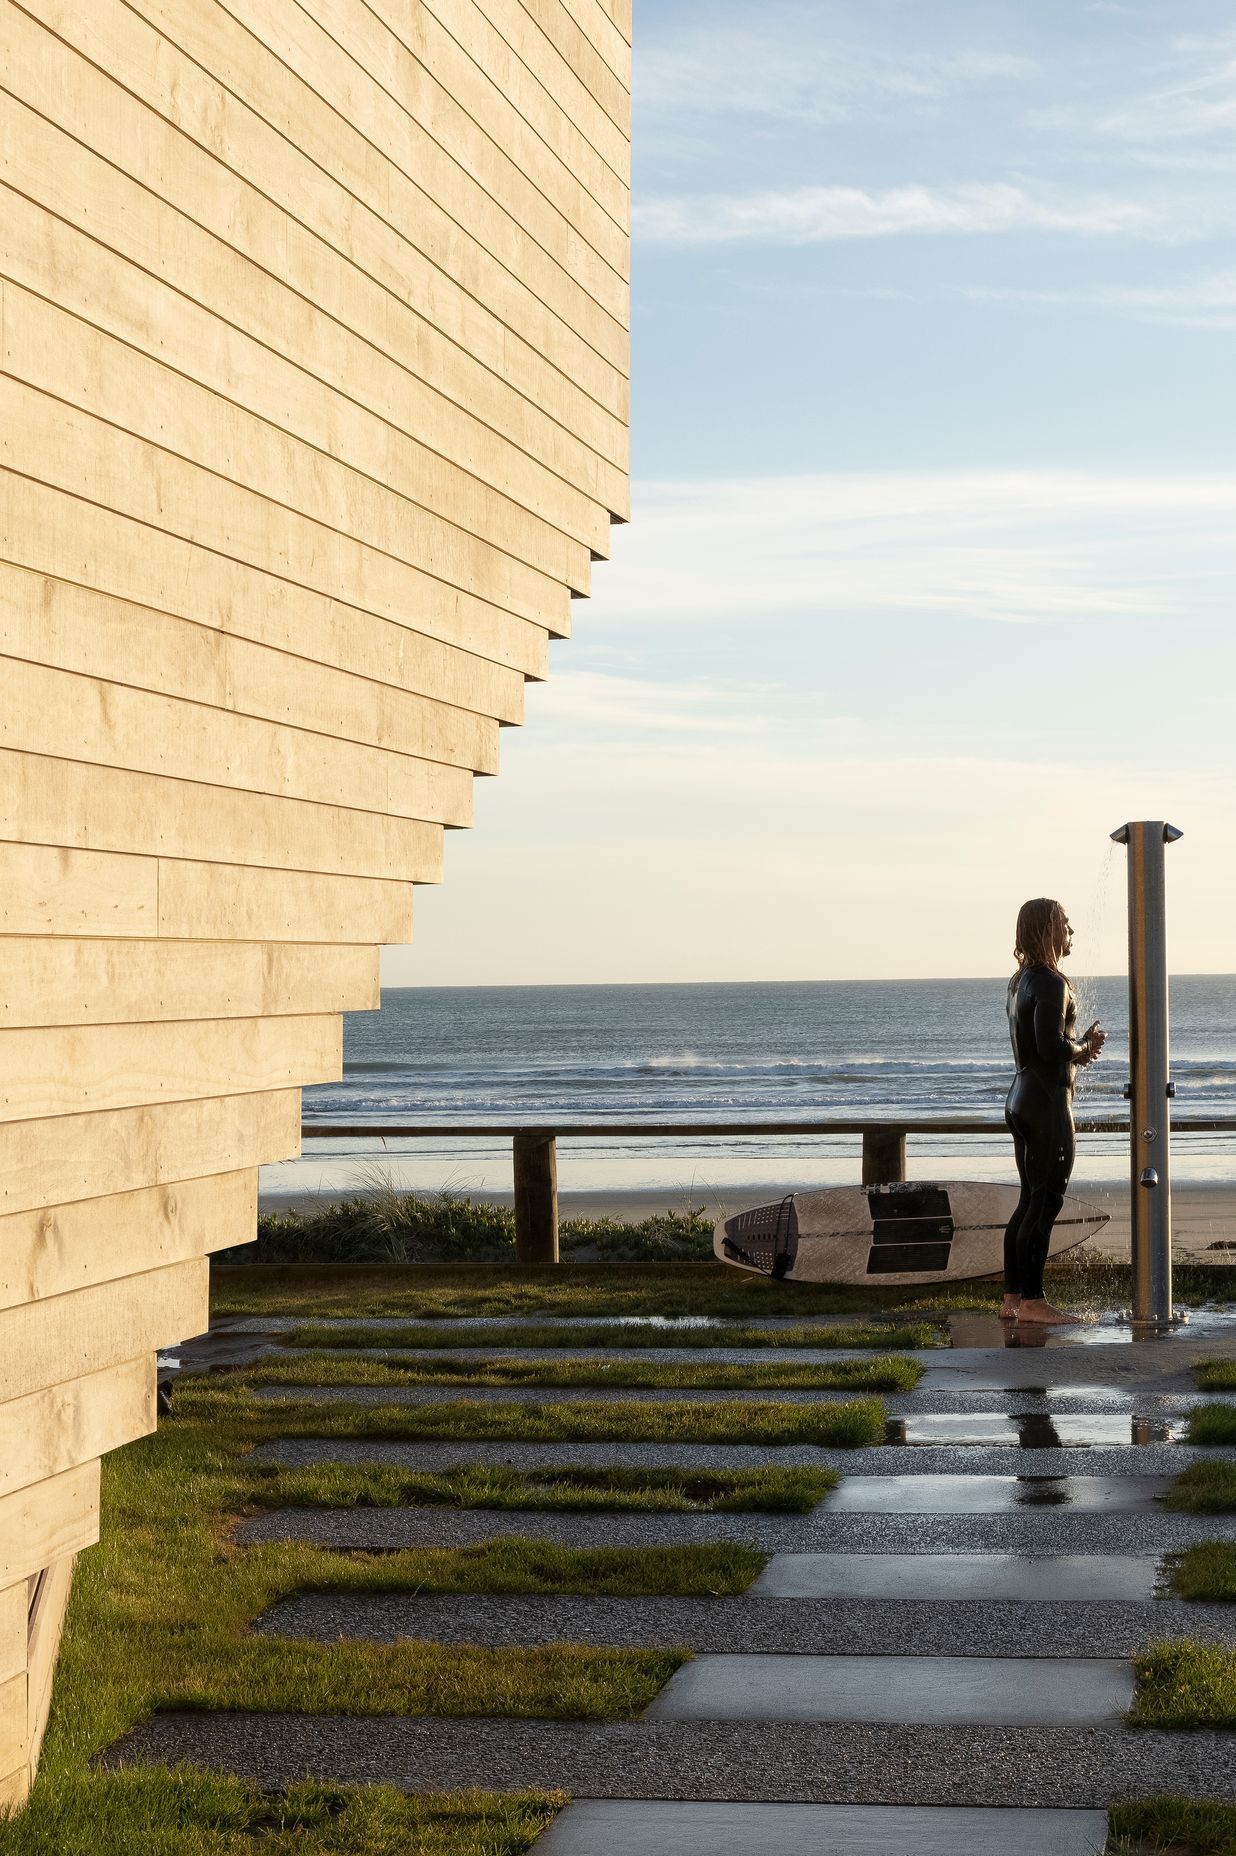 A surfer enjoys an outdoor shower at the front of the building. Ken says the beautiful new building hasn't suffered any tagging, and he often sees members of the community gather outside for morning coffee to interact and enjoy the facility.